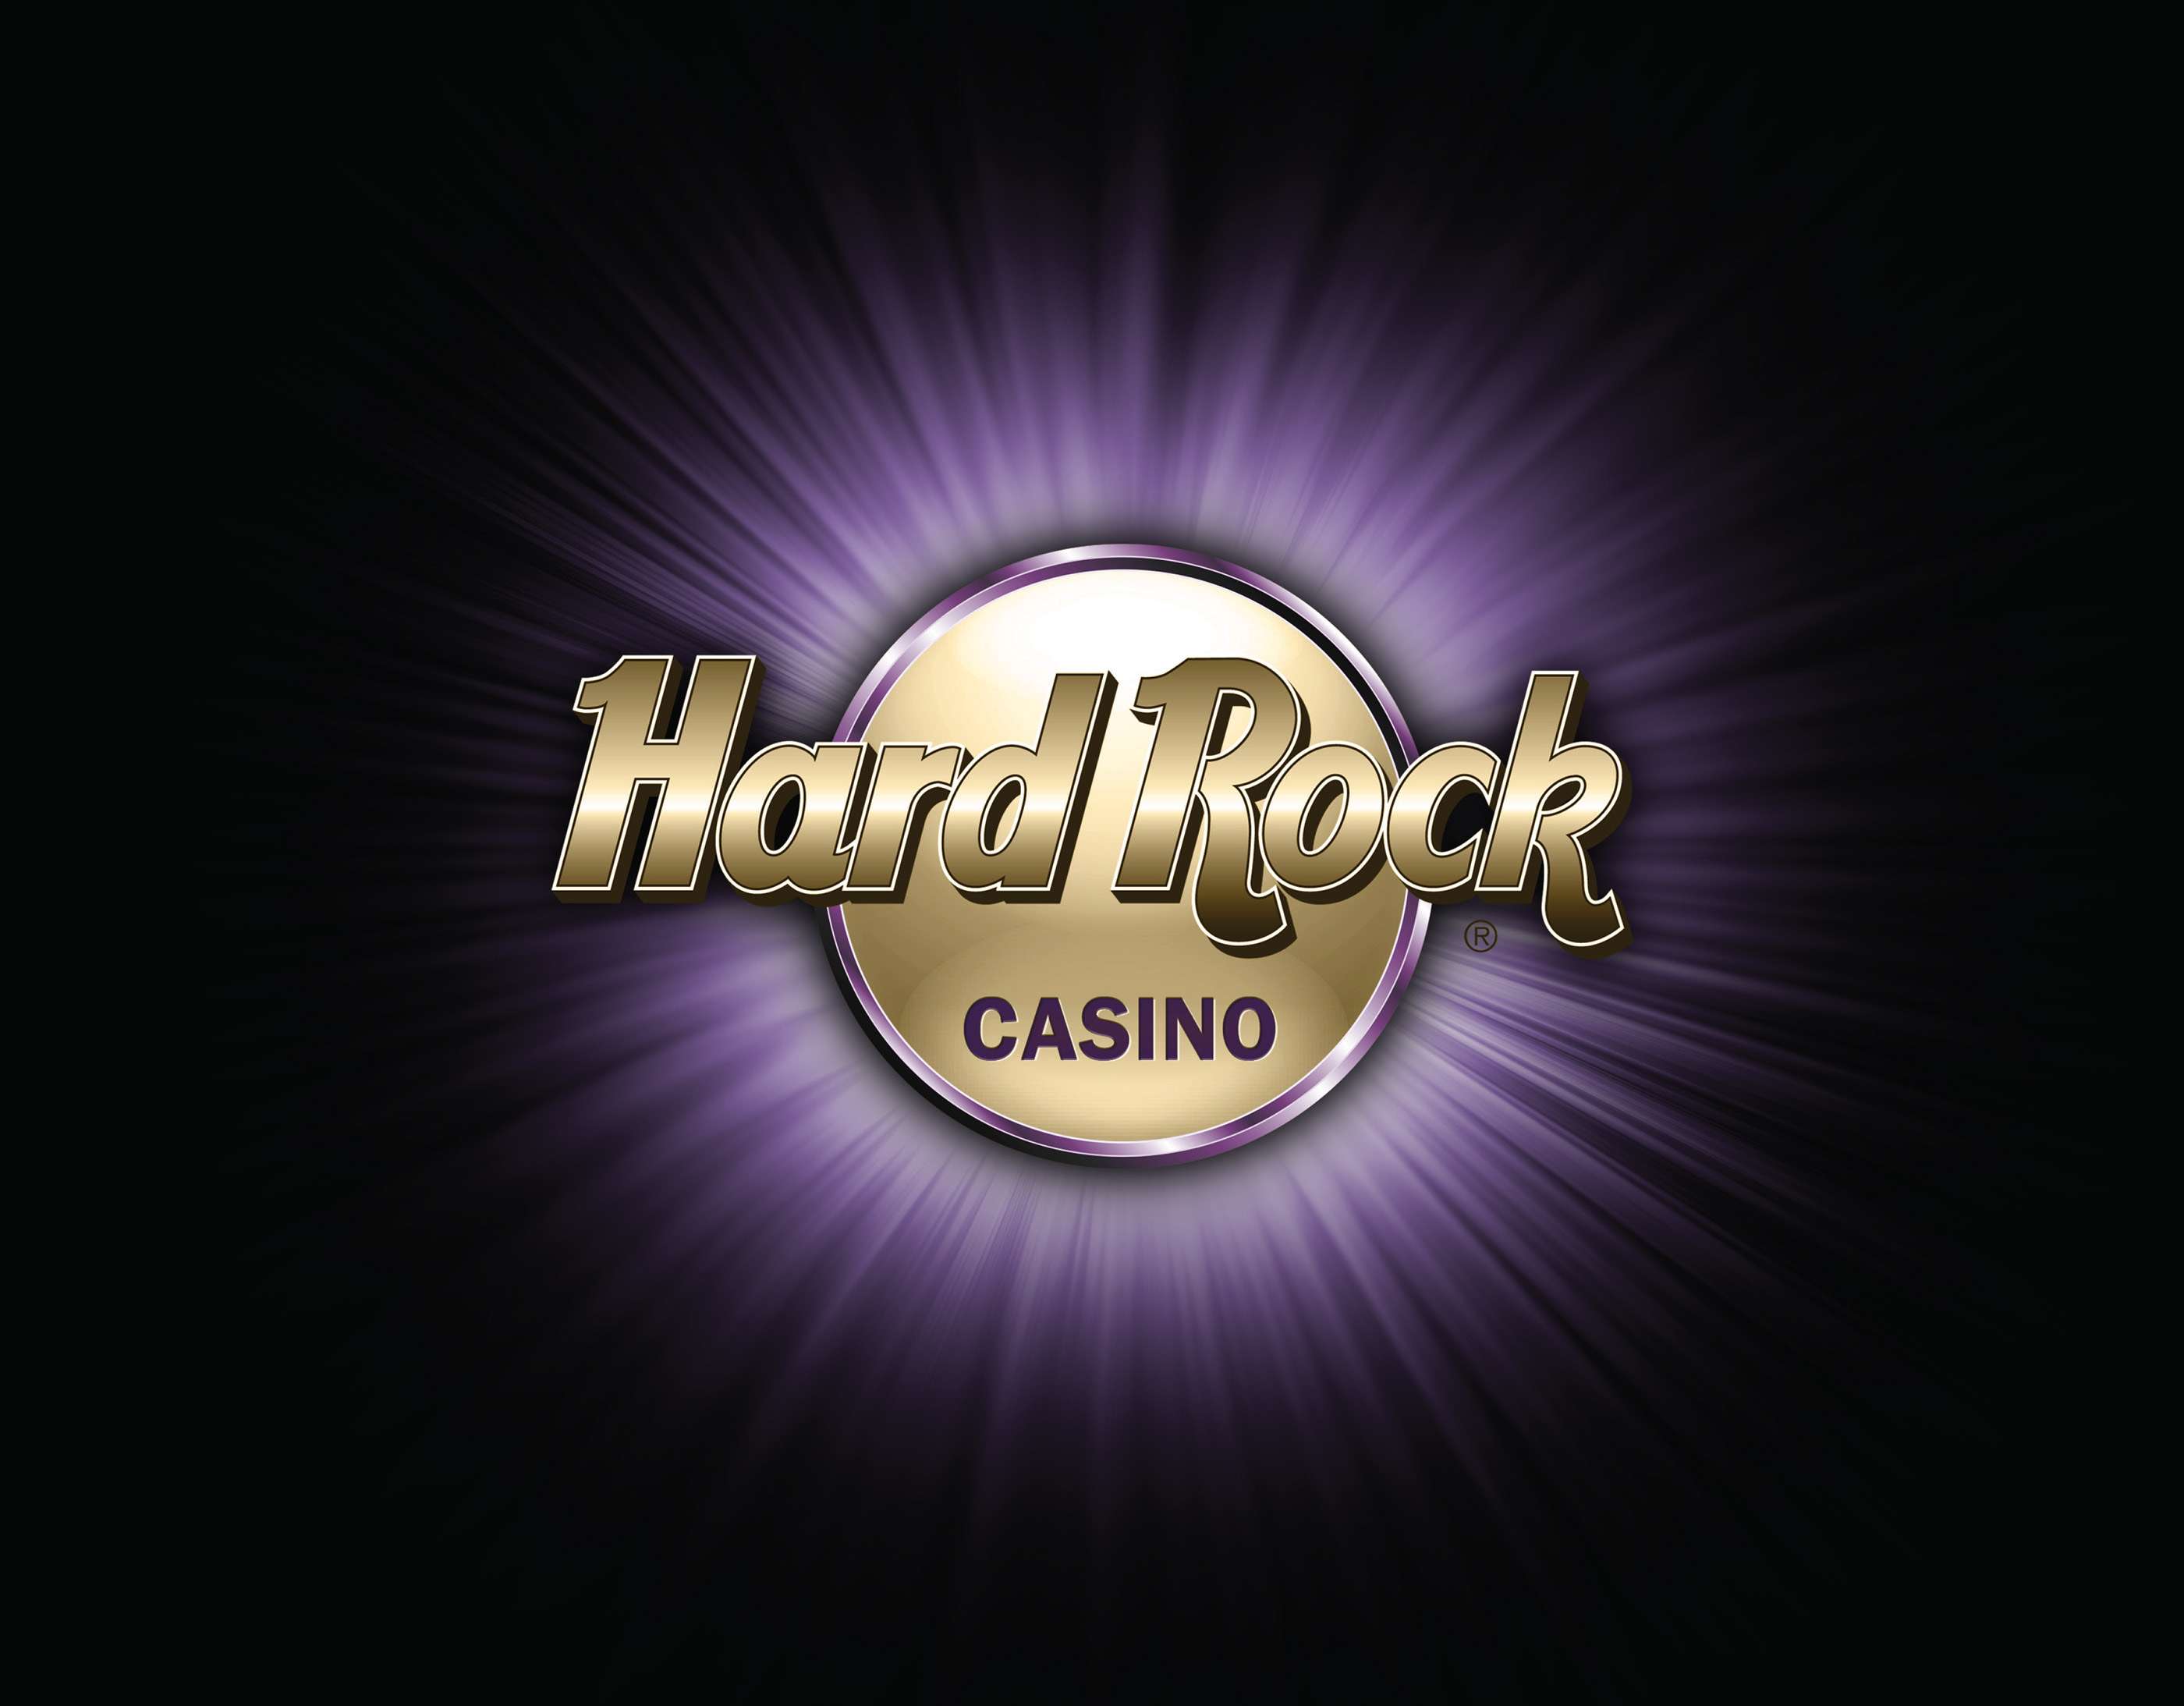 Where Is The Hard Rock Casino In Florida